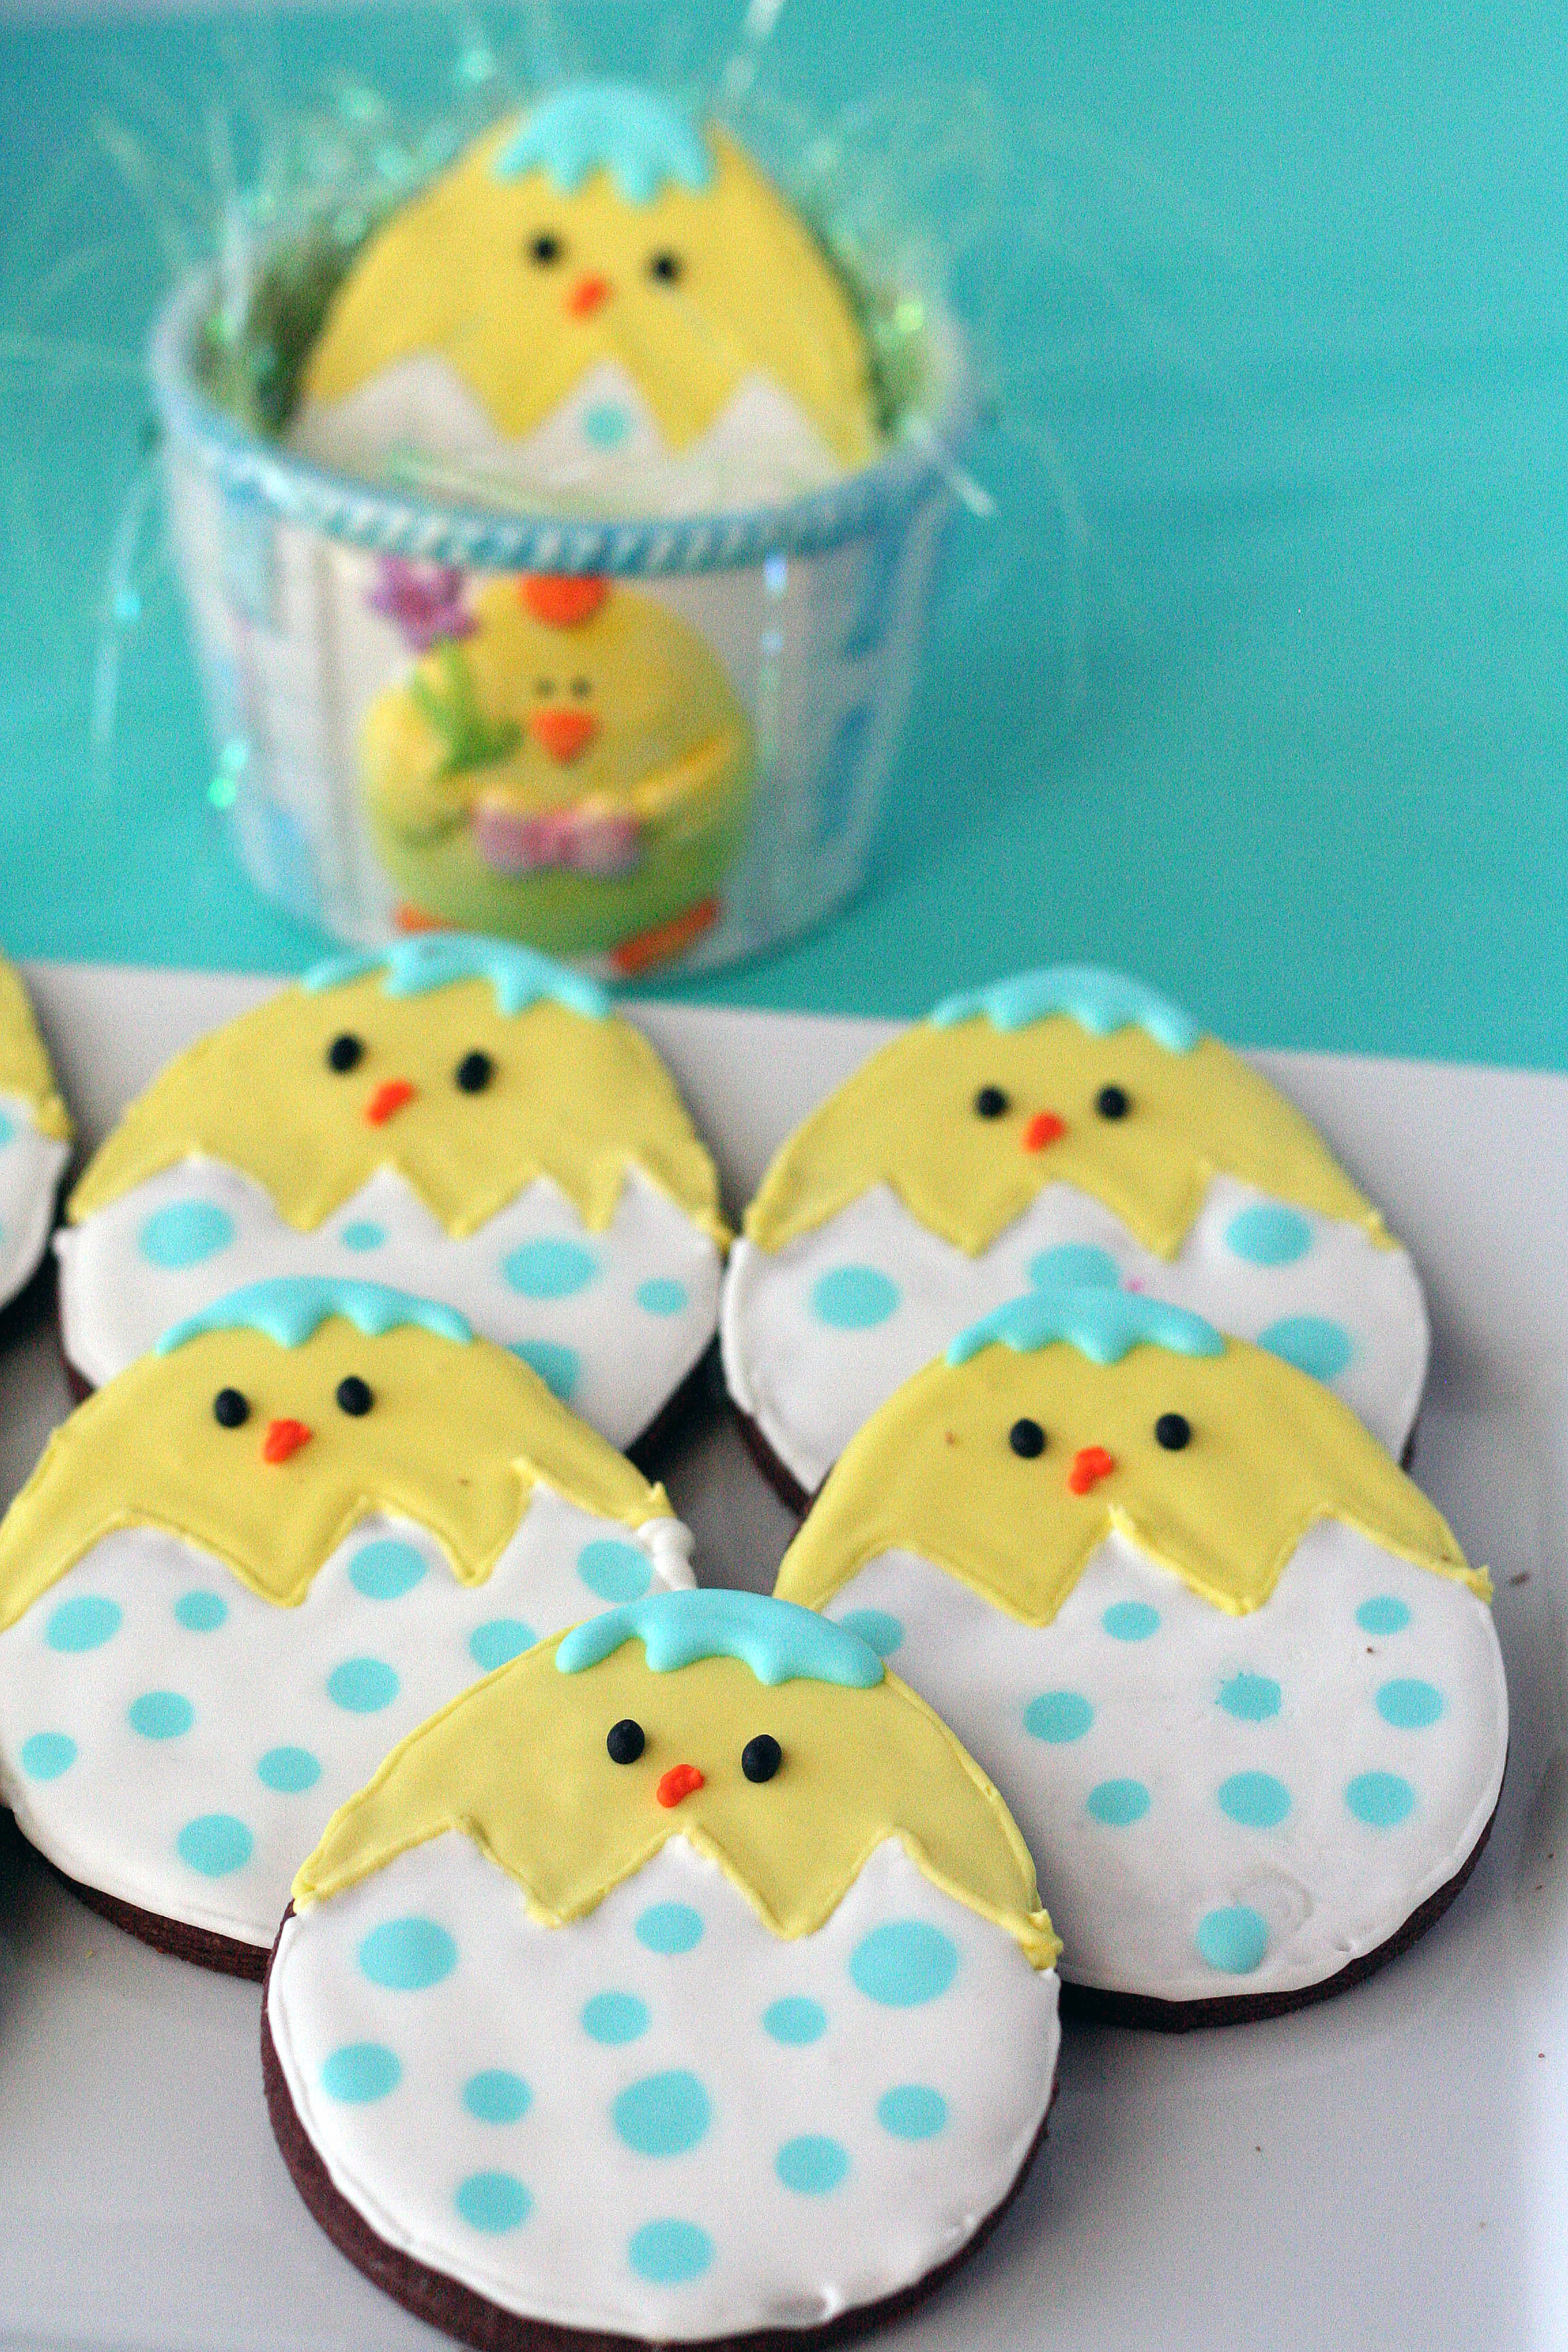 Hatching chick cookies